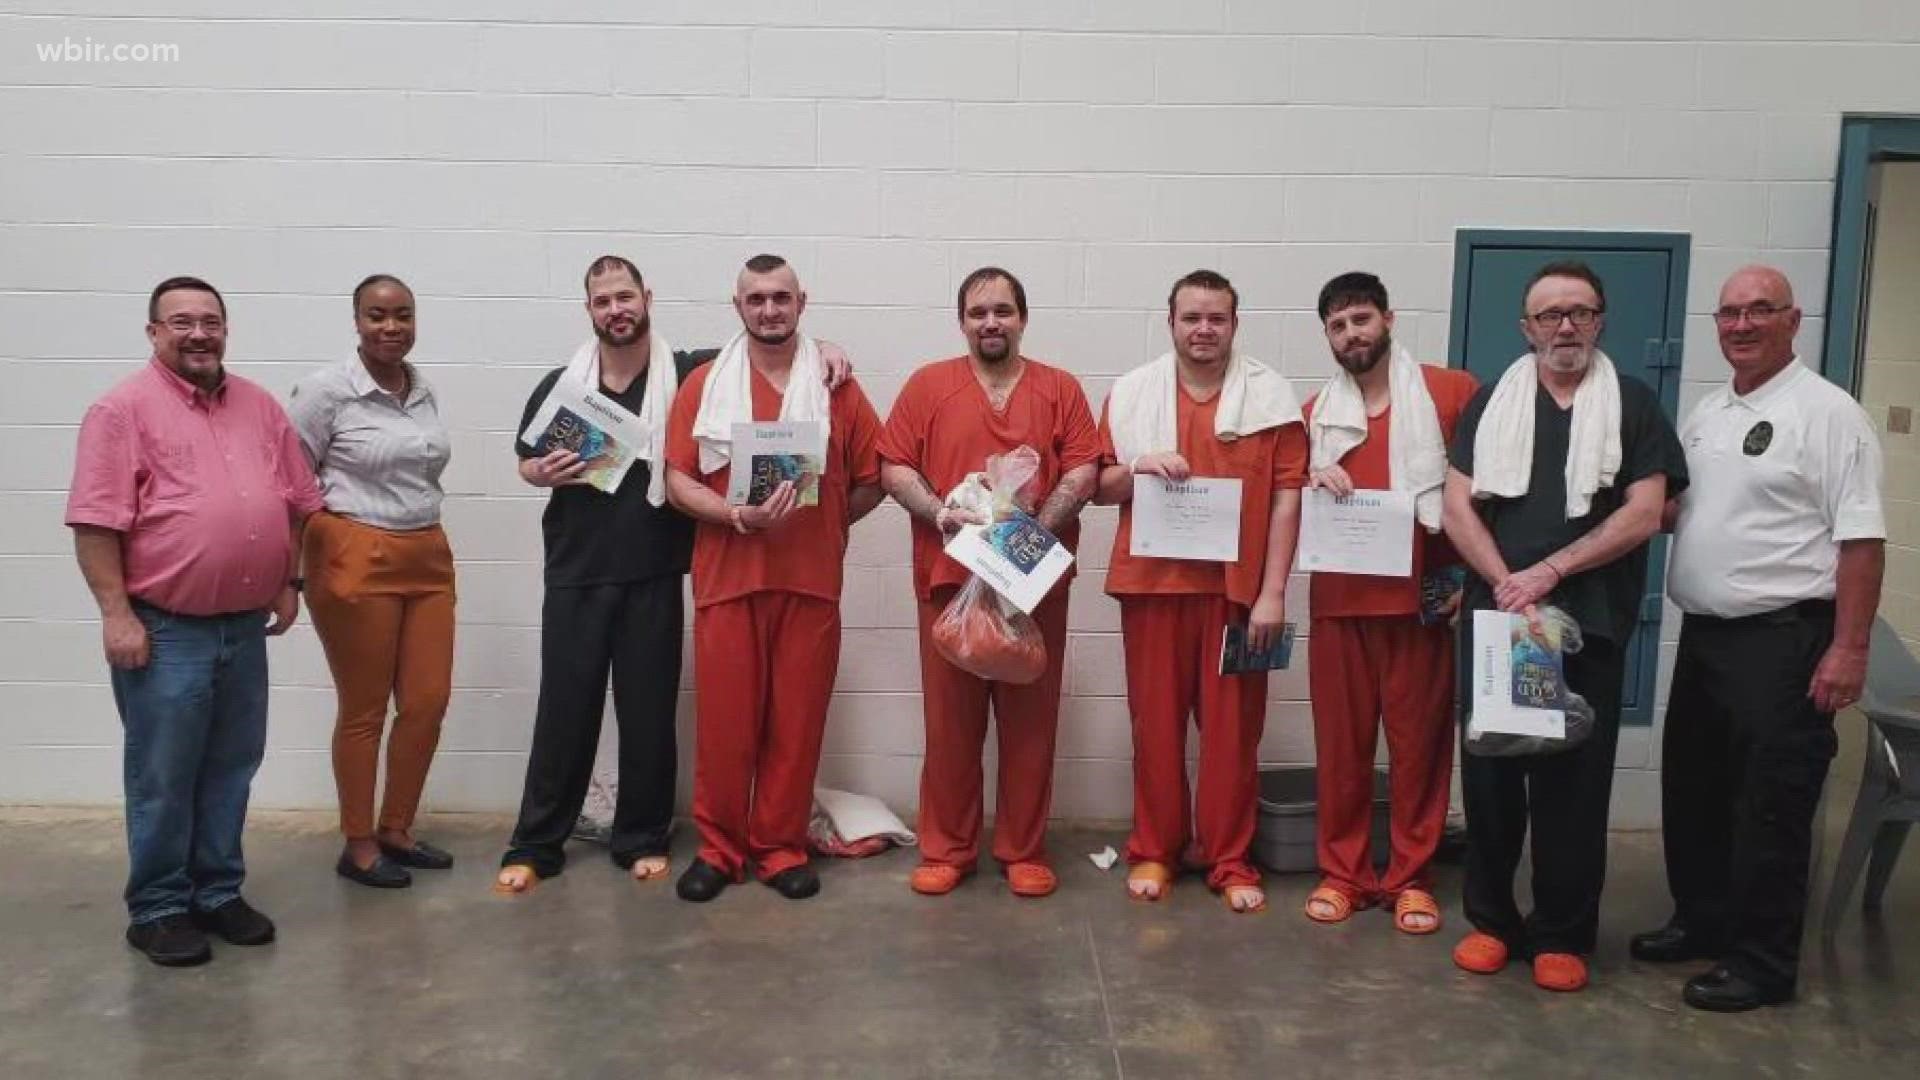 Anderson County deputies said they were moved when six inmates decided to get baptized by a local pastor and a chaplain while serving their sentence.